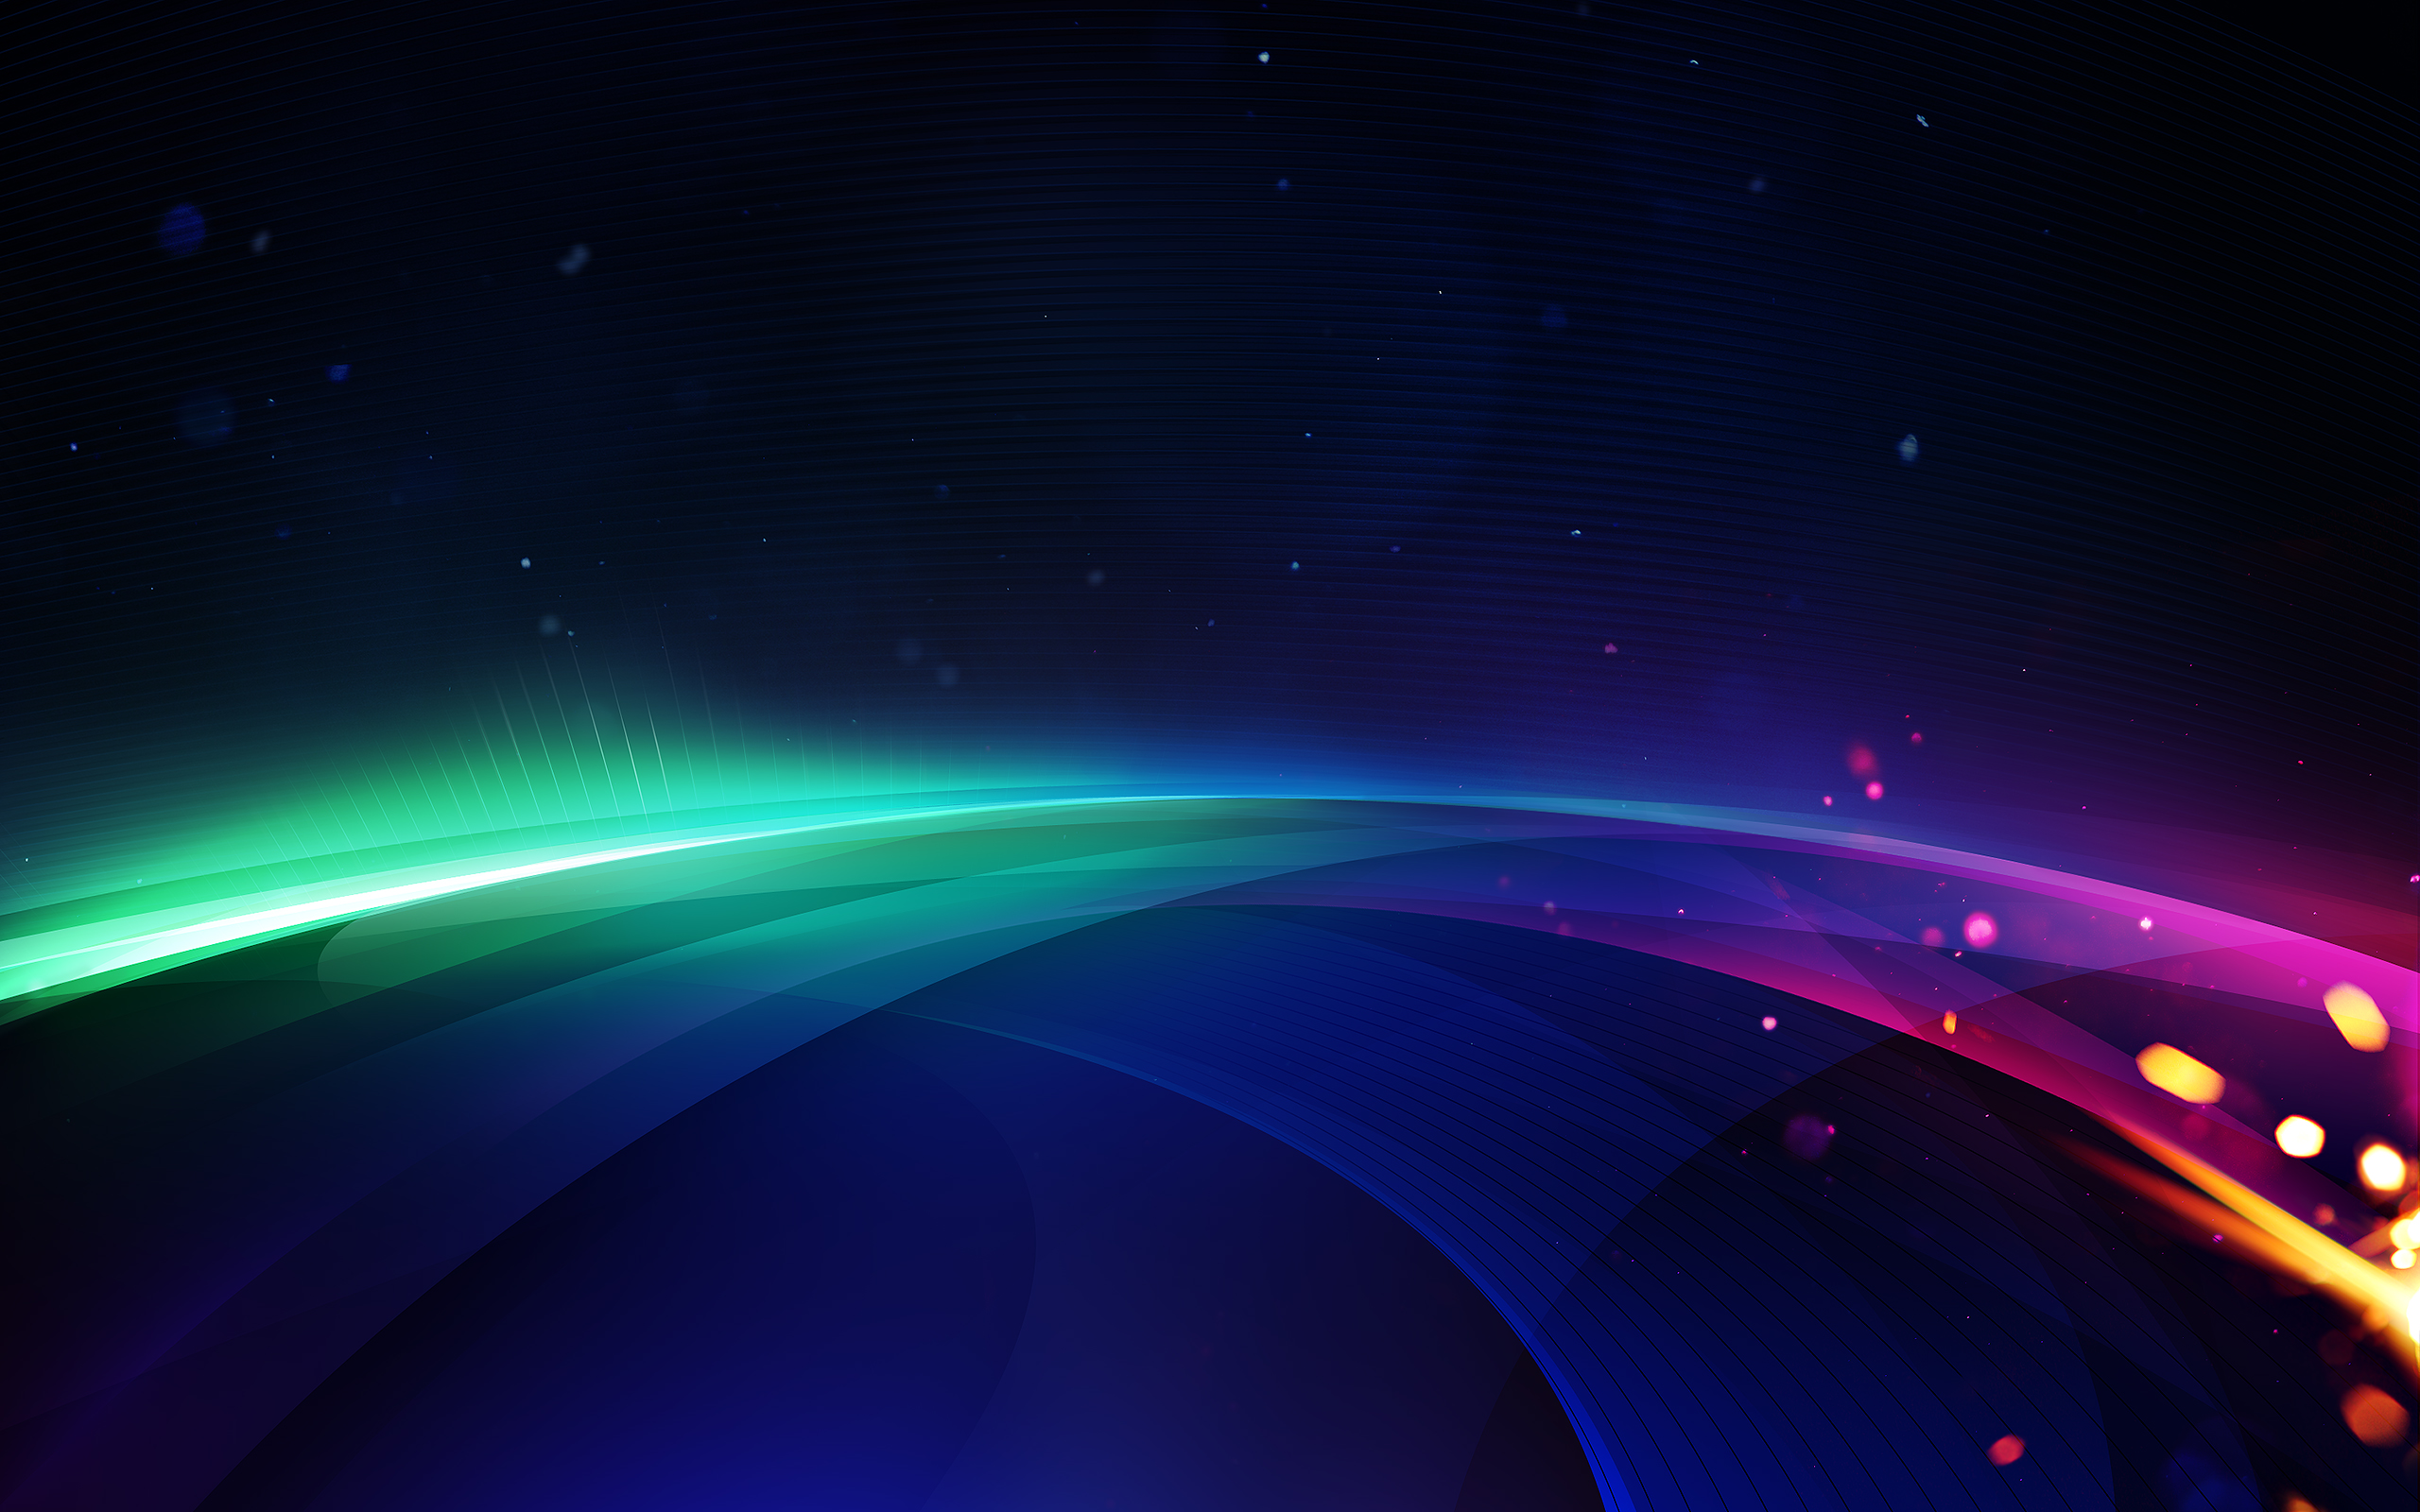 Windows Background High Resolution Wallpaper For Your Pc